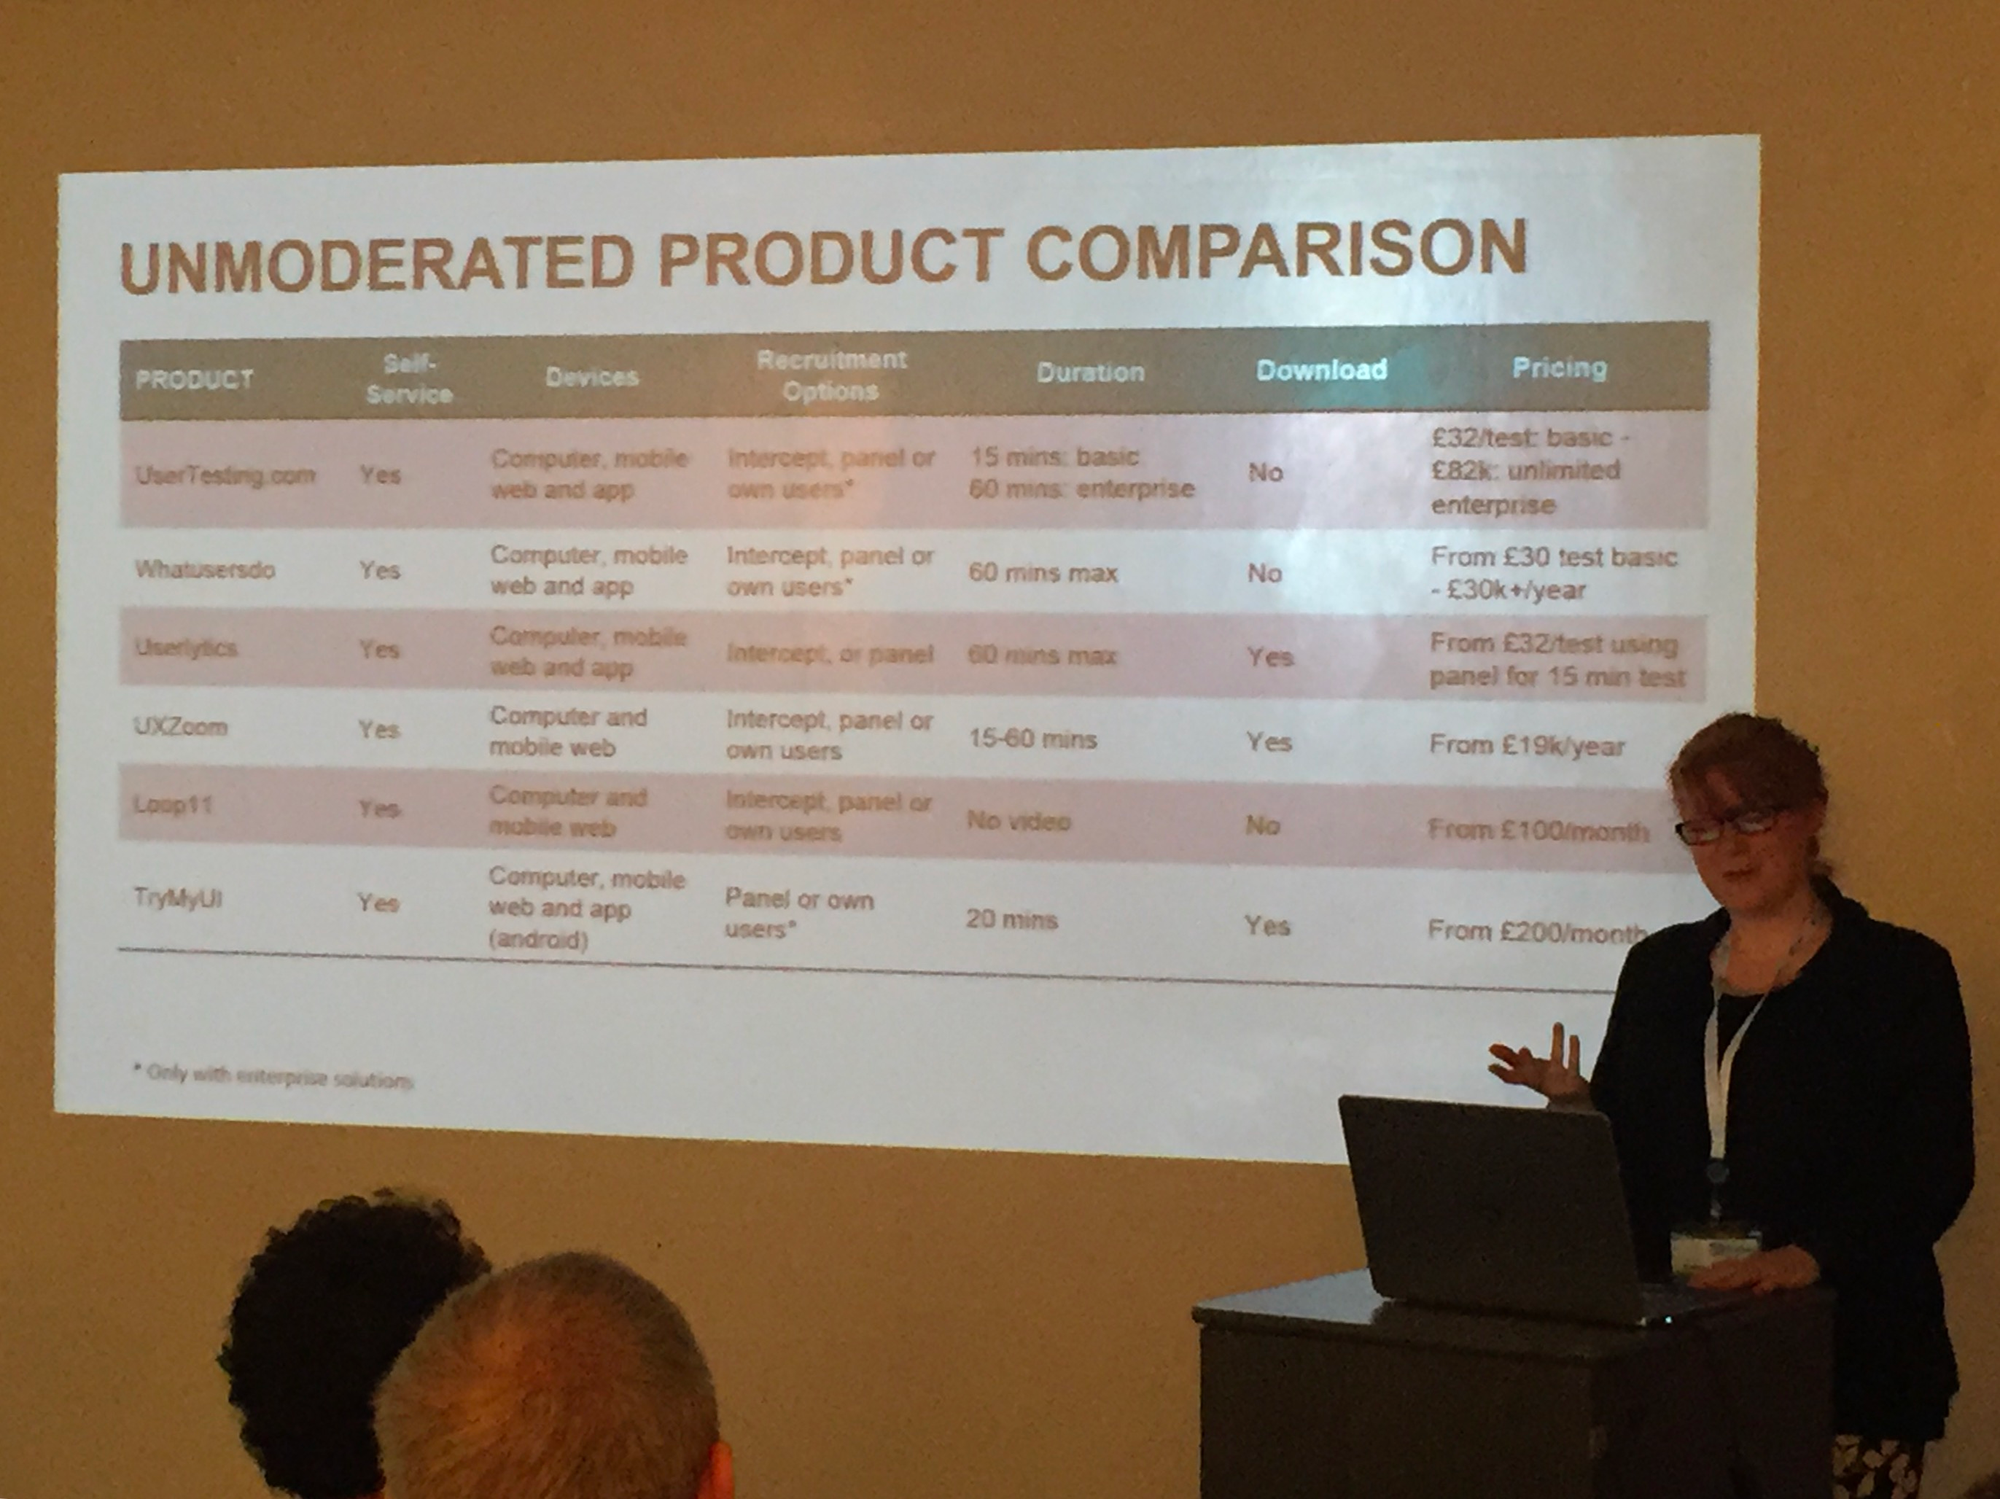 Unmoderated product comparison